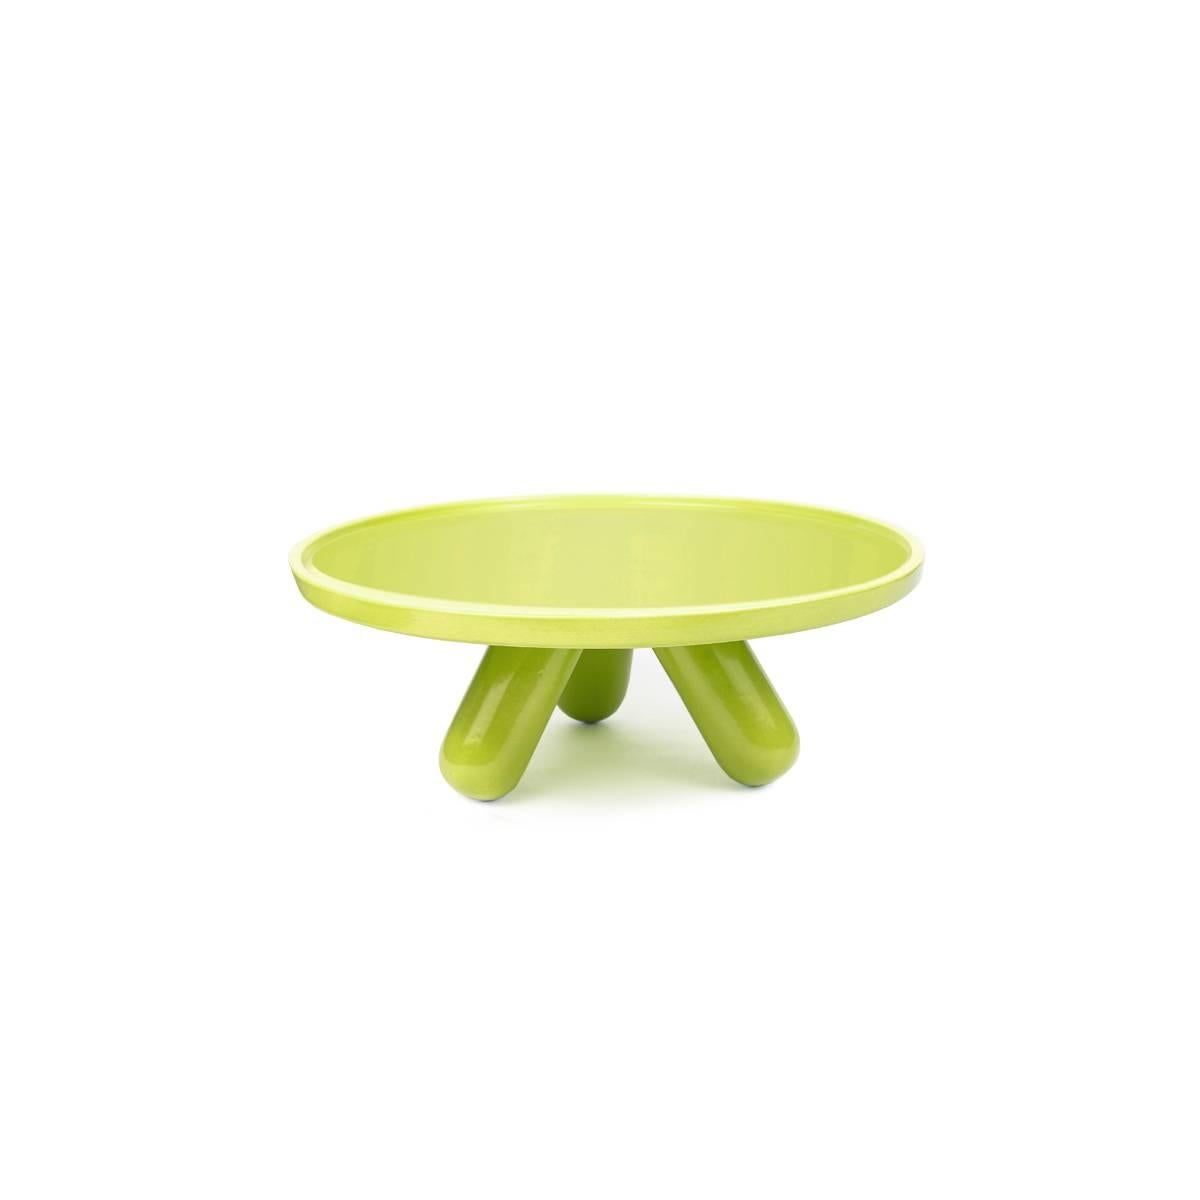 Gambone is a large ceramic riser designed by Aldo Cibic, available in three color versions (anthracite, red and green). The product is part of Table Joy collection: an upbeat, vividly colored and ever so slightly radical family of tableware that can